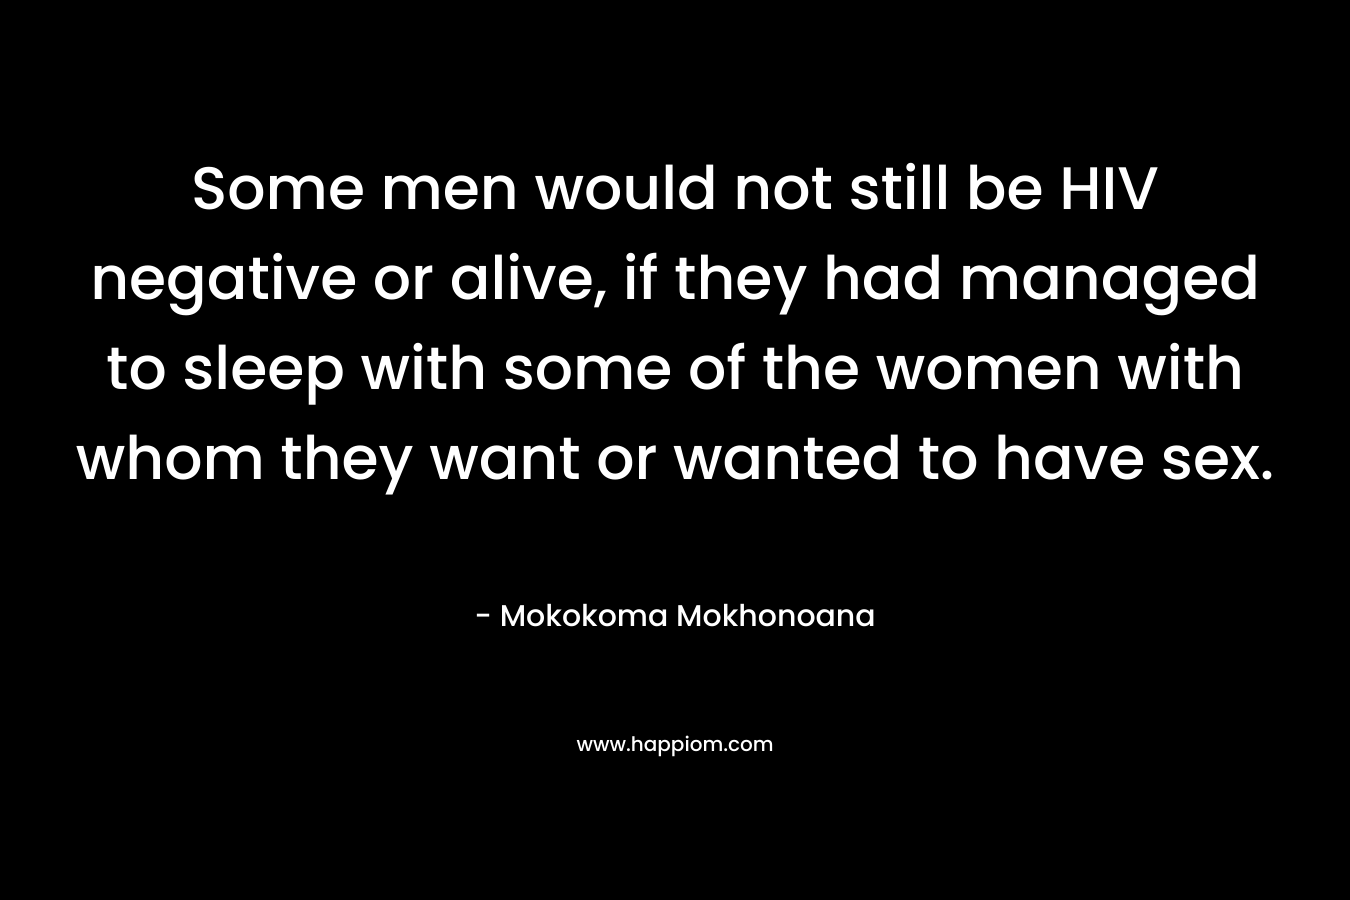 Some men would not still be HIV negative or alive, if they had managed to sleep with some of the women with whom they want or wanted to have sex.